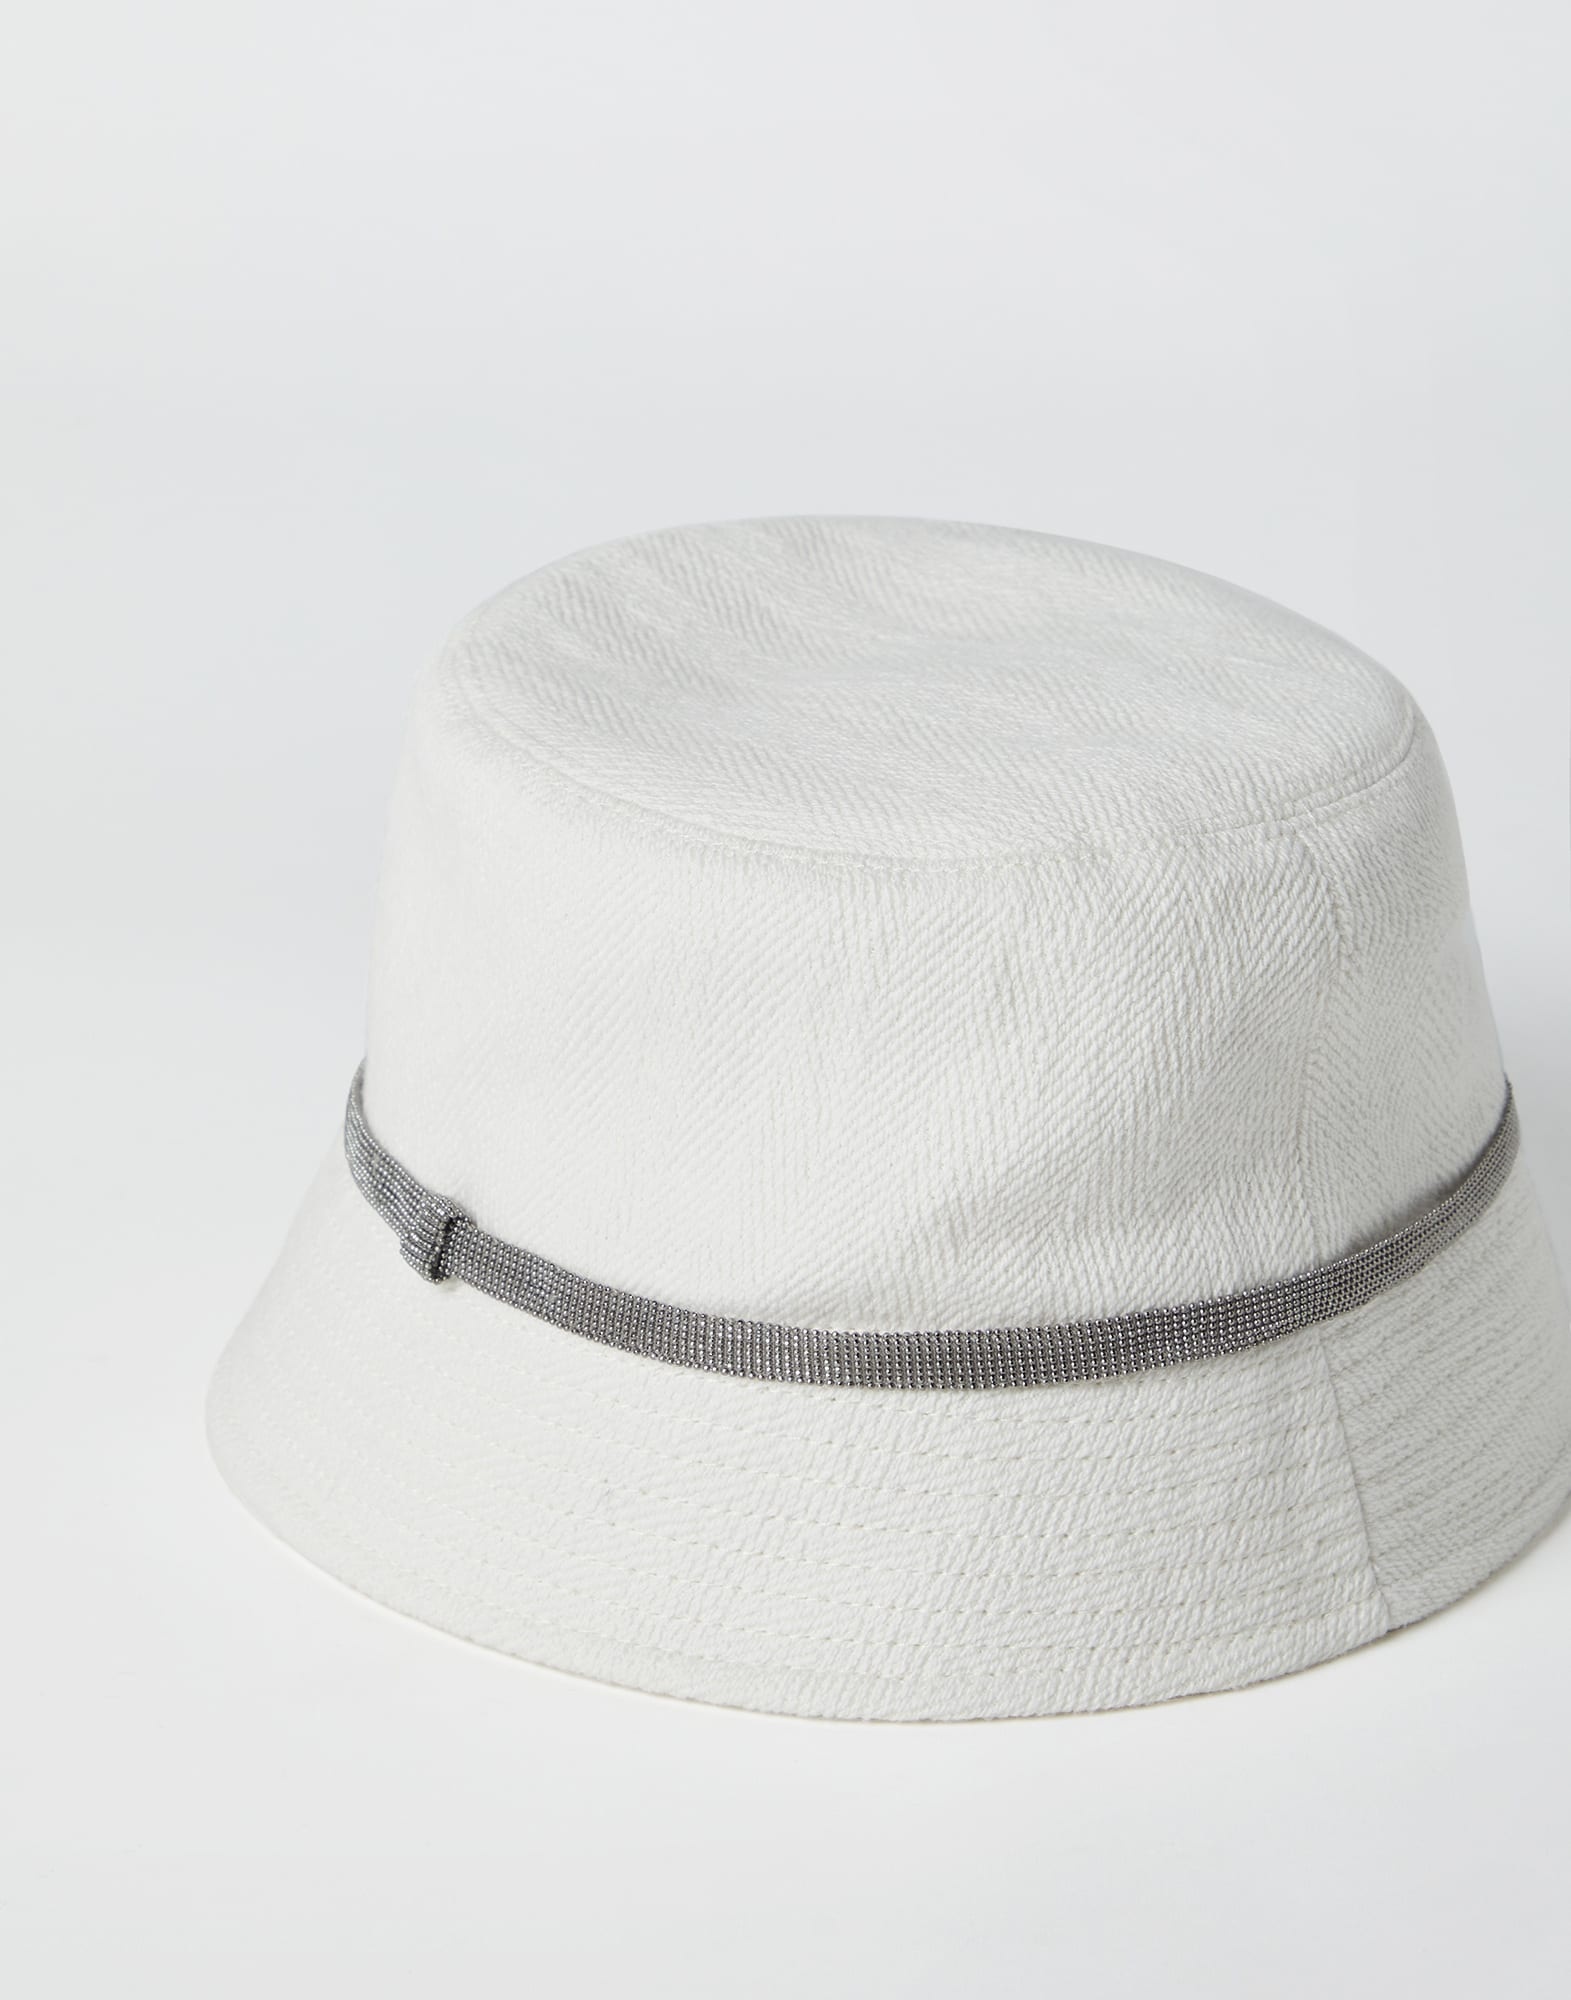 Cotton and linen chevron bucket hat with shiny band - 2